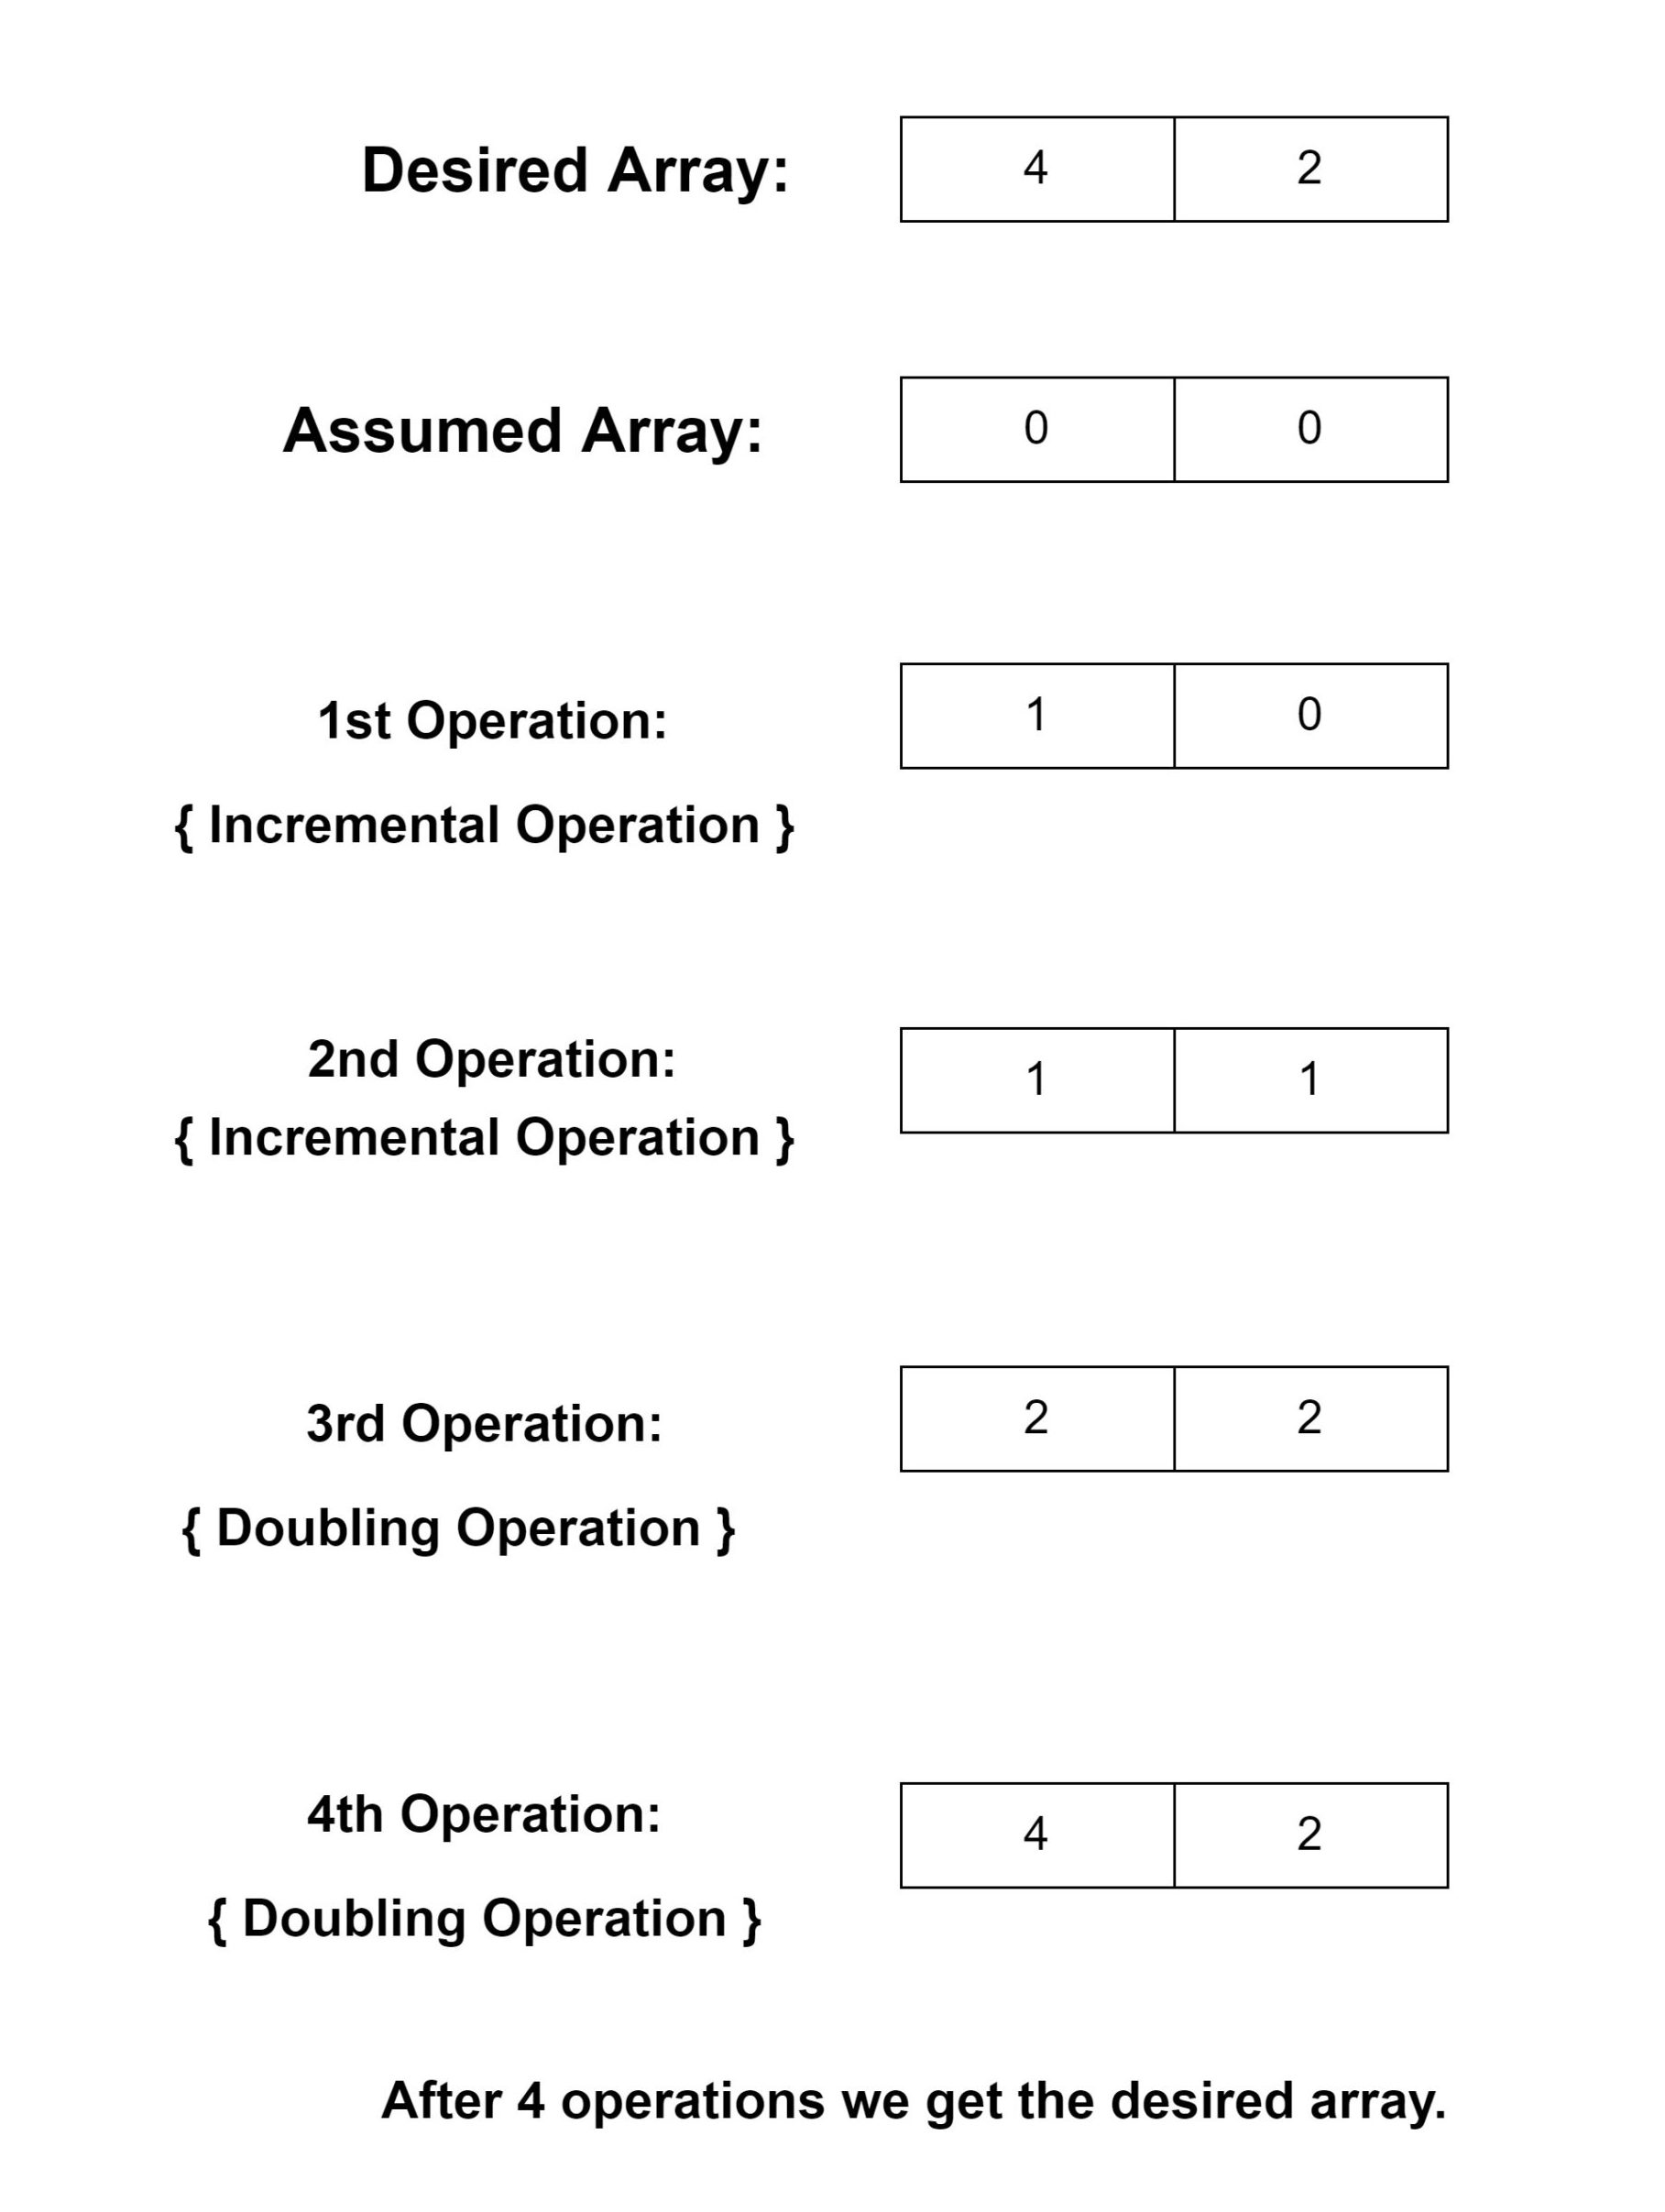 Count minimum steps to get the given desired array